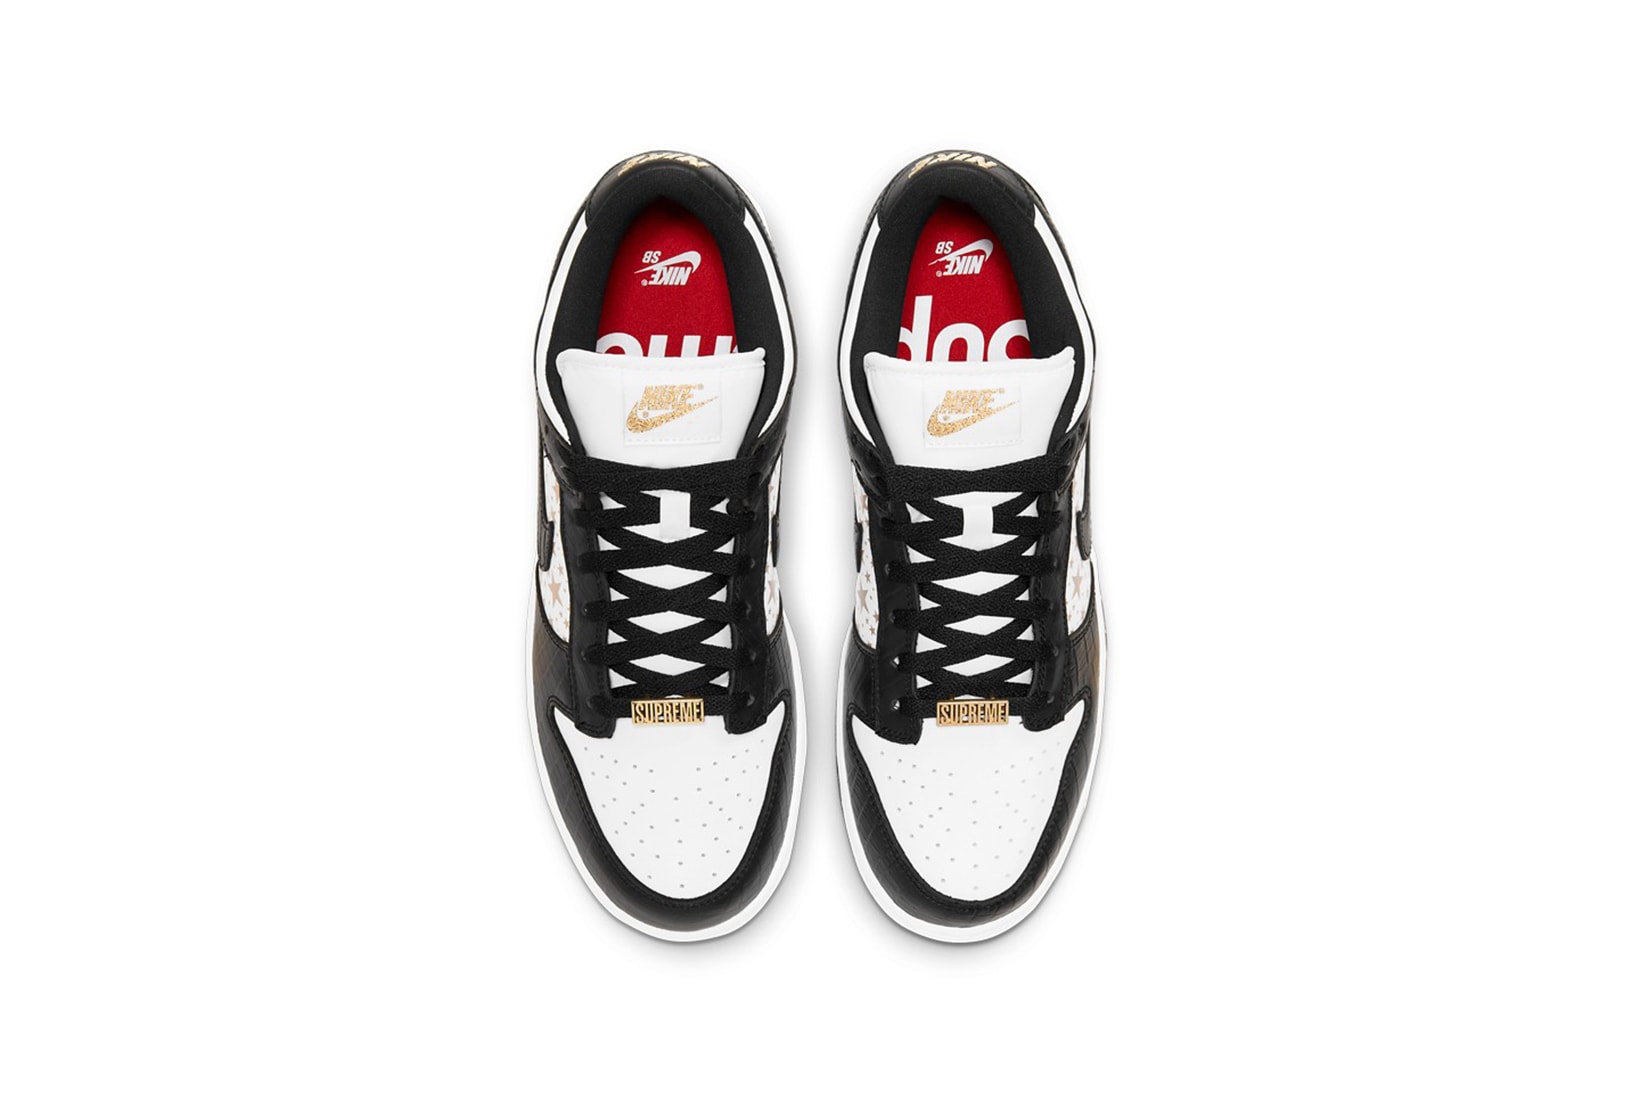 supreme nike sb dunk low collaboration sneakers black white colorway gold stars laces red insole